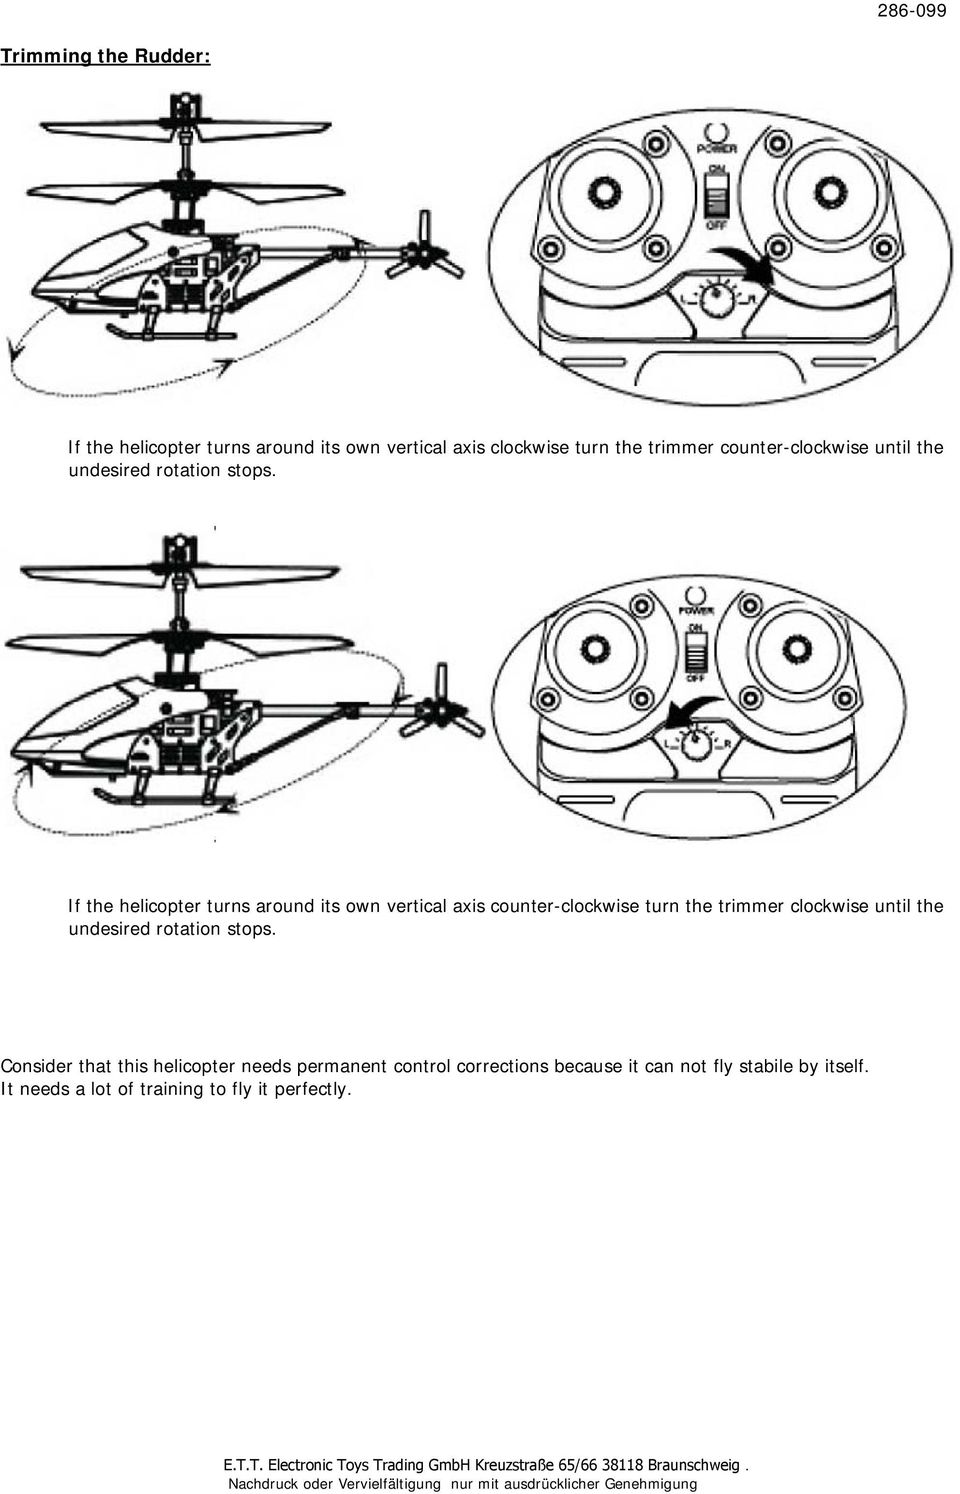 If the helicopter turns around its own vertical axis counter-clockwise turn the trimmer clockwise until the